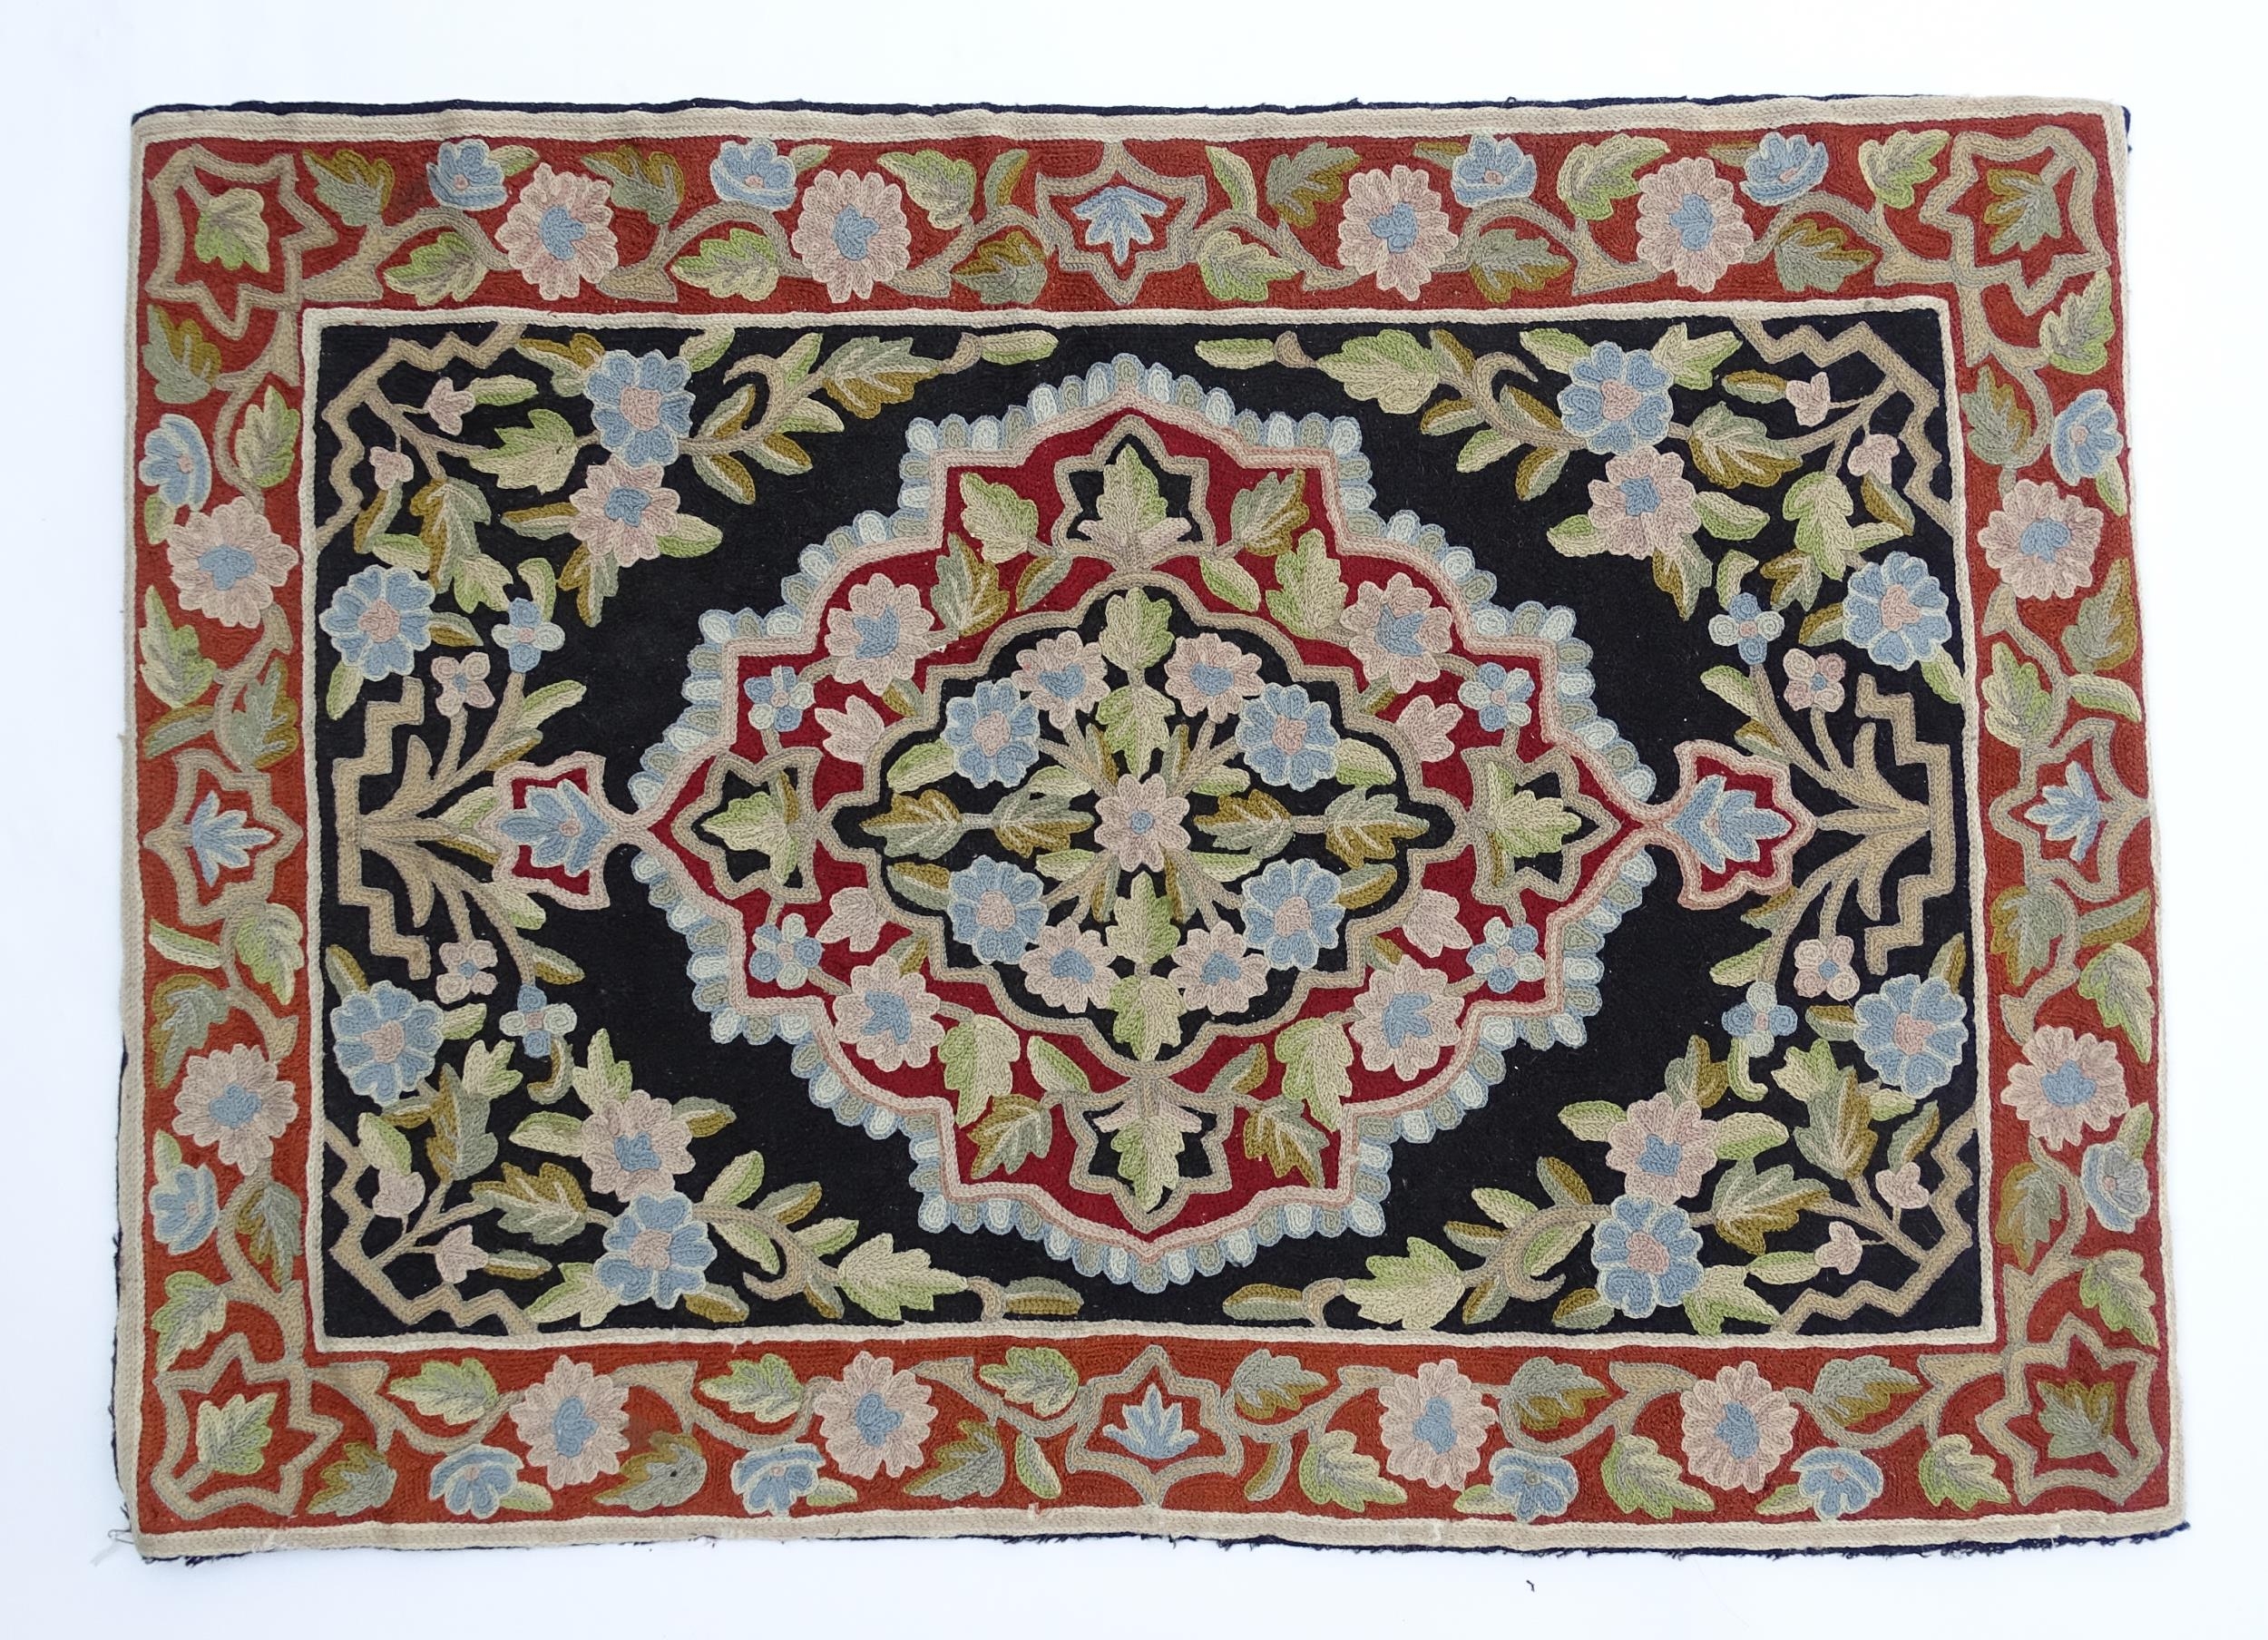 Carpet / Rug : A black and red ground rug with floral and foliate detail. Approx. 35" x 24 1/2"